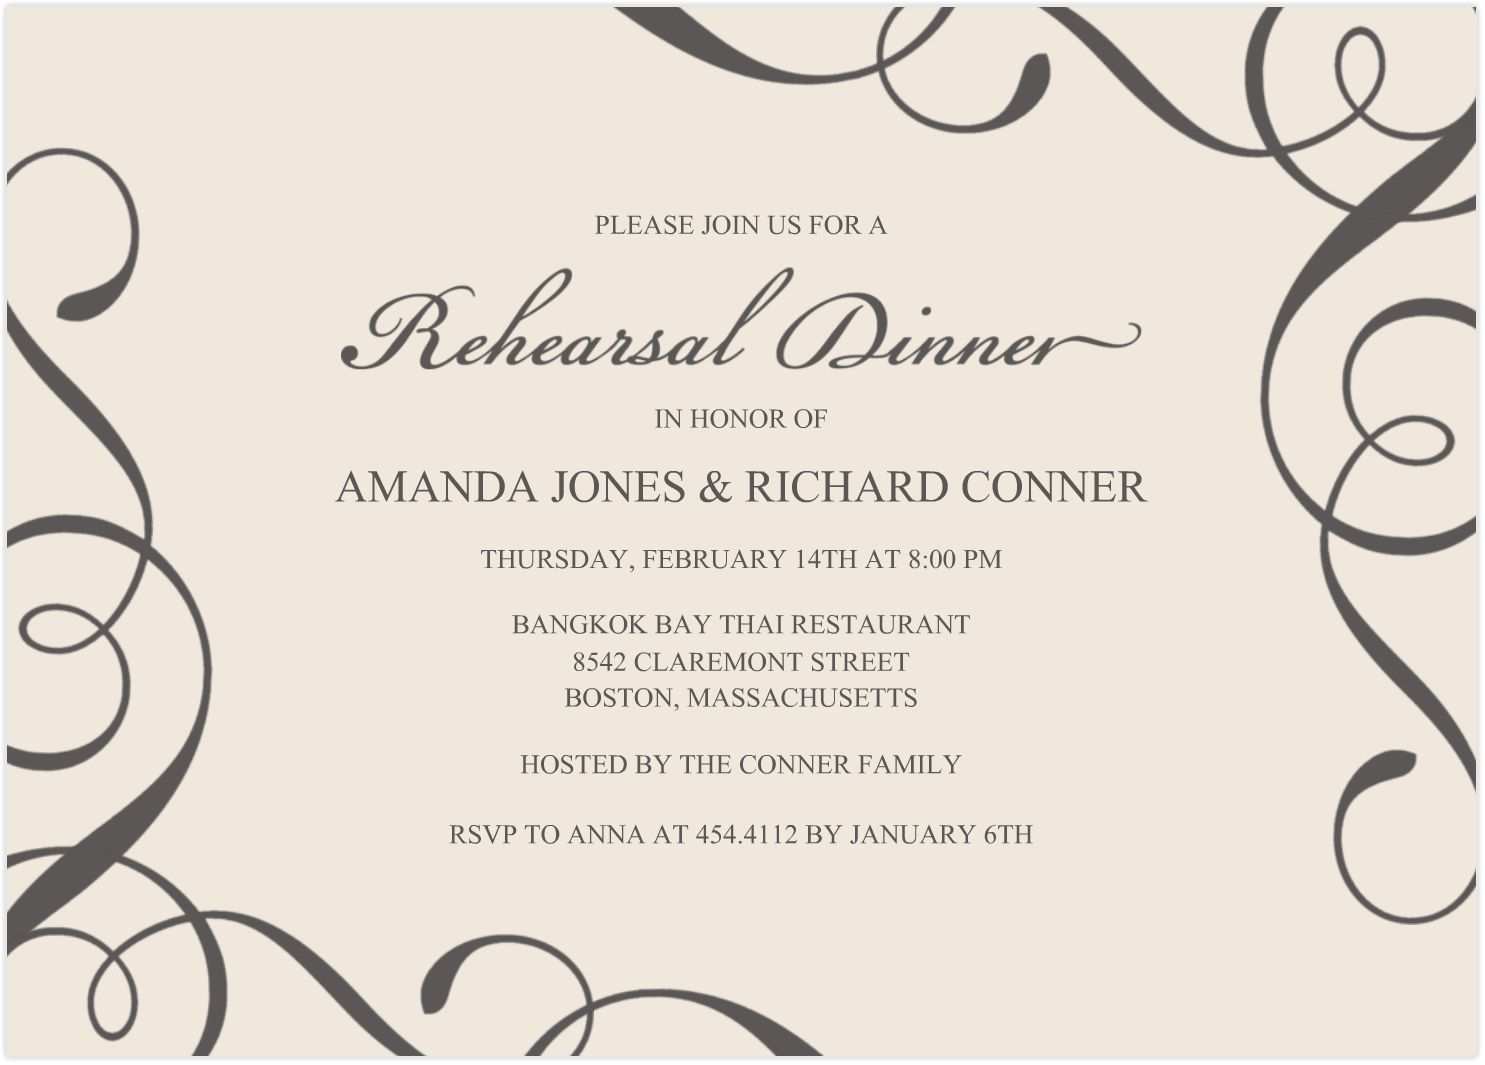 23 Format Dinner Invitation Template Word in Word with Dinner Regarding Free Dinner Invitation Templates For Word